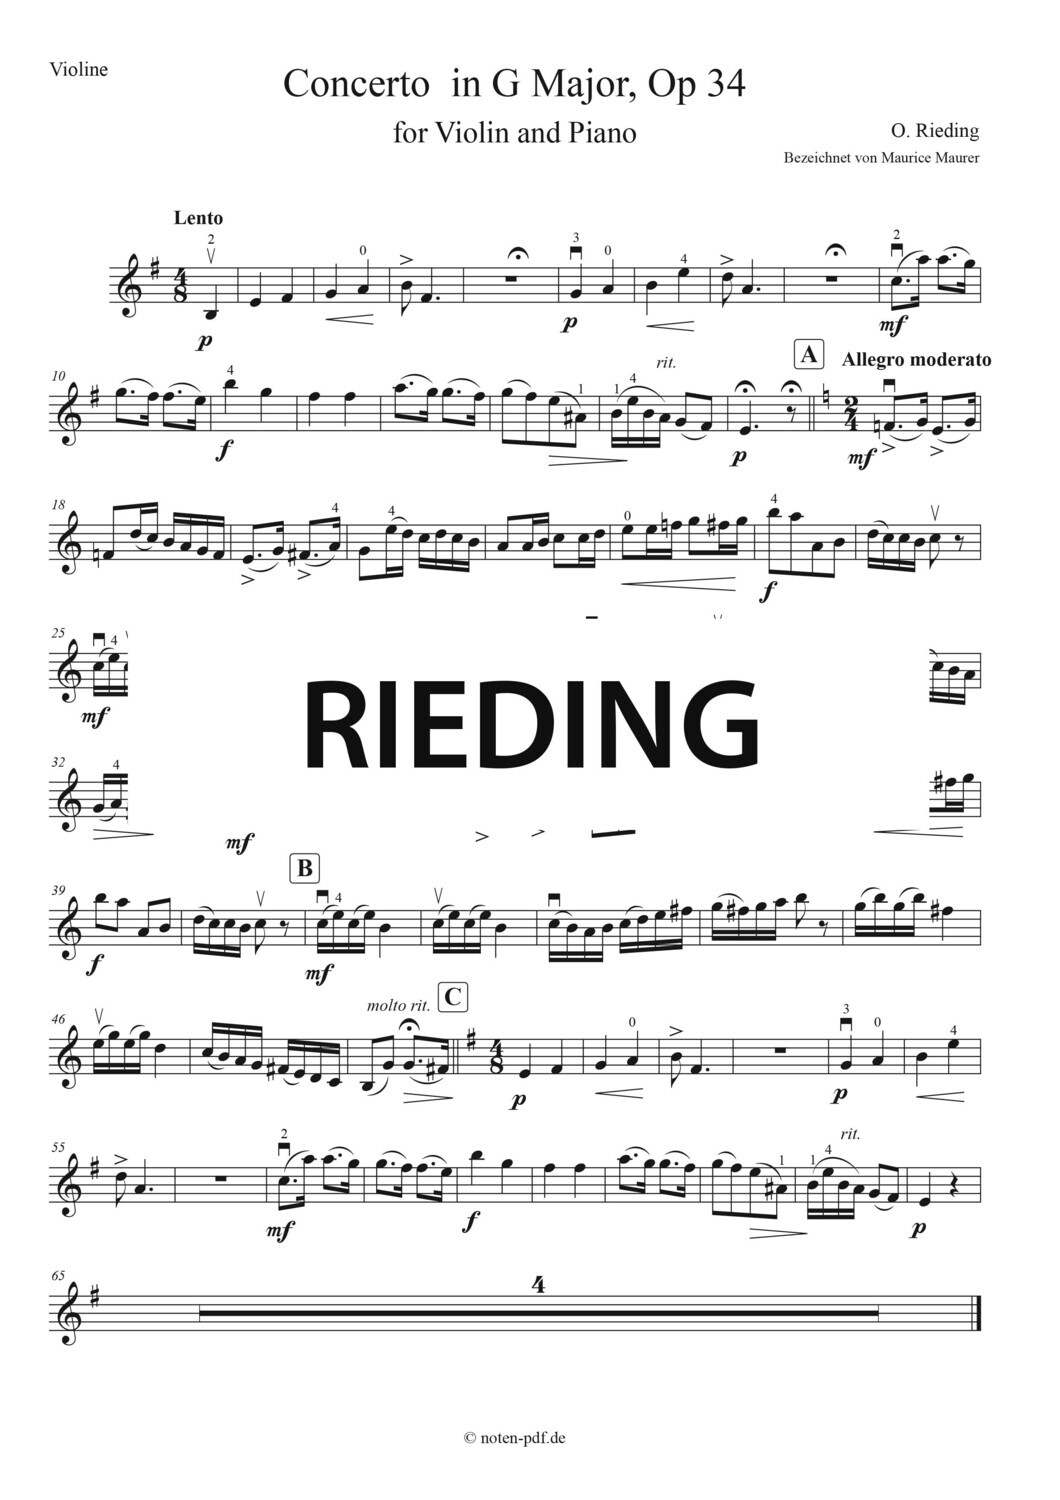 Rieding: Concerto in G Major Op. 34, 2. Movement